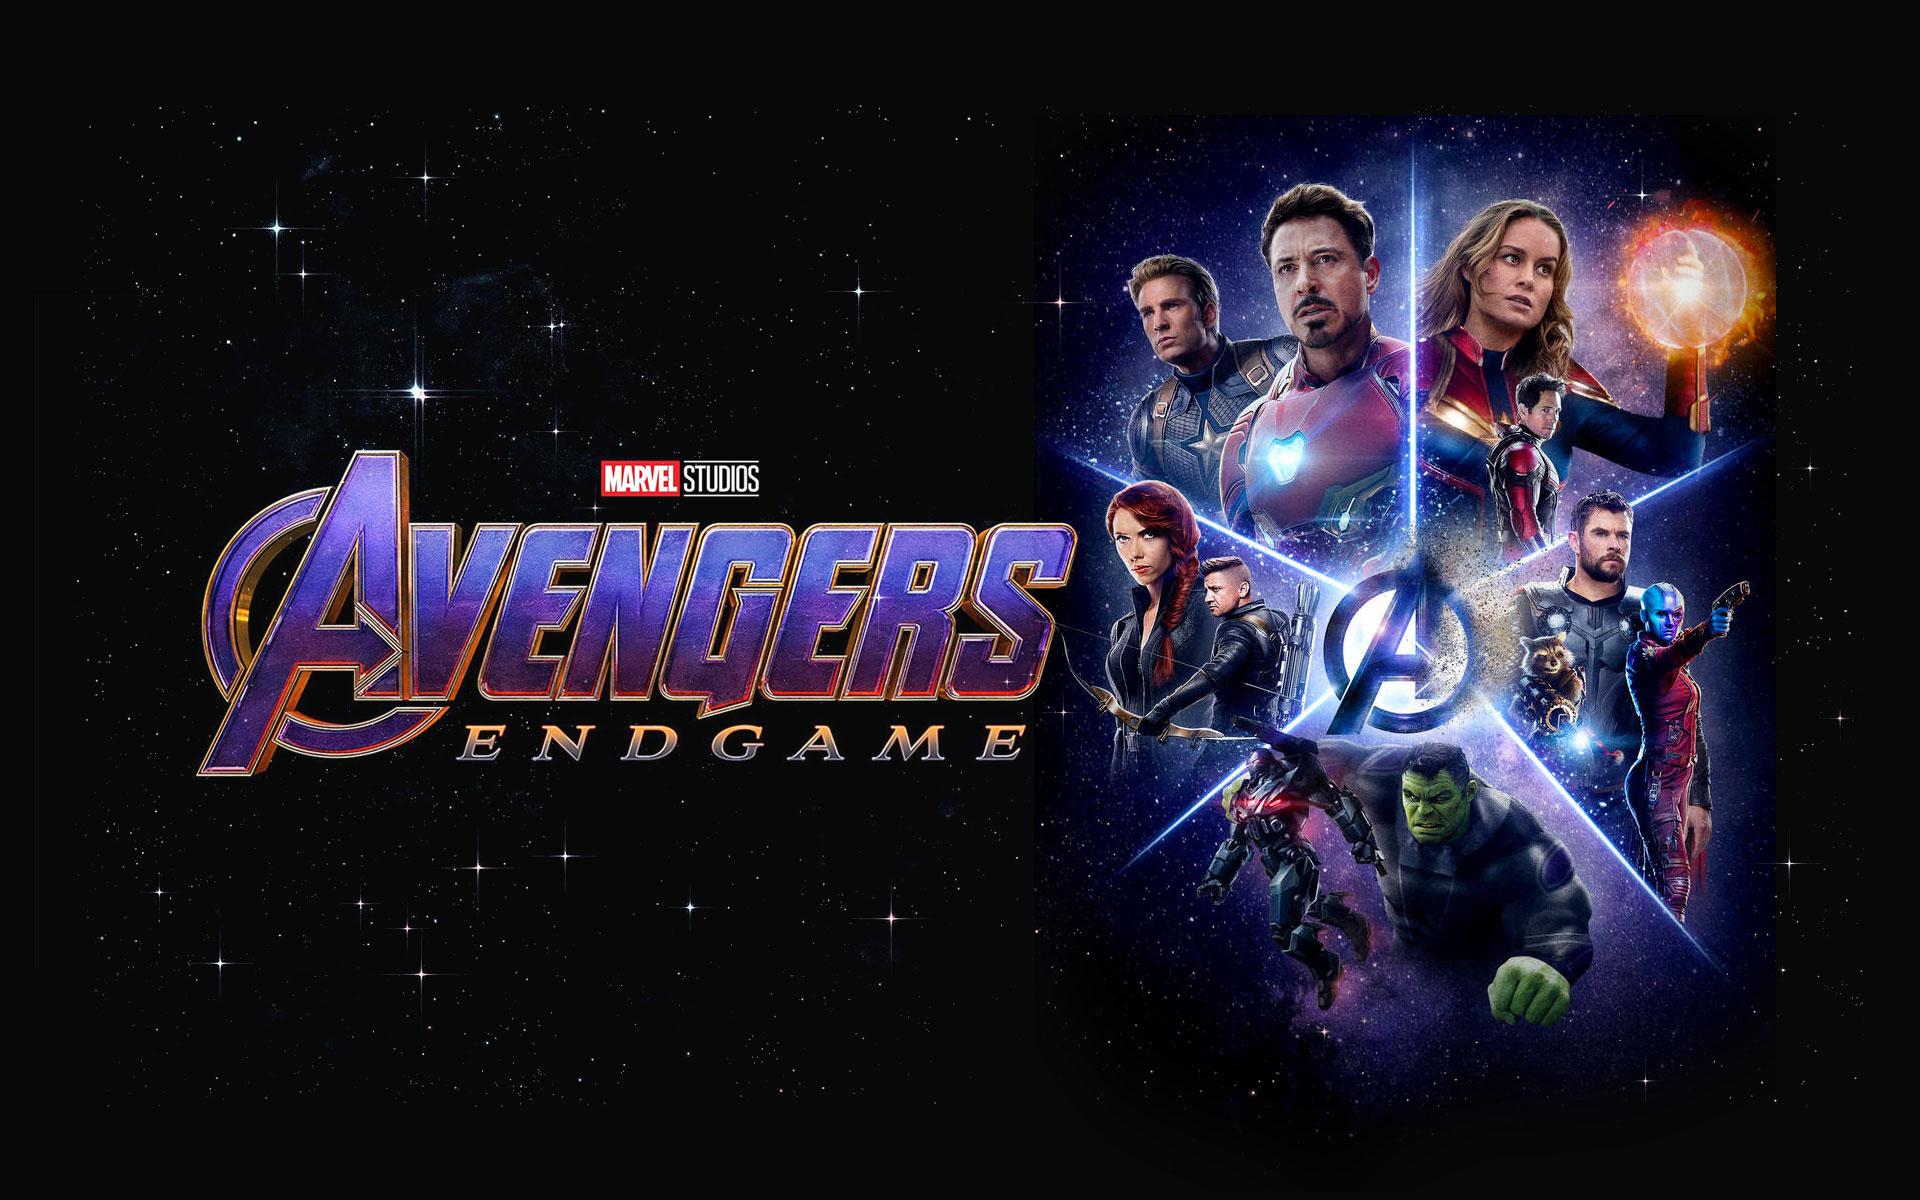 The Avengers Poster Wallpapers - Wallpaper Cave